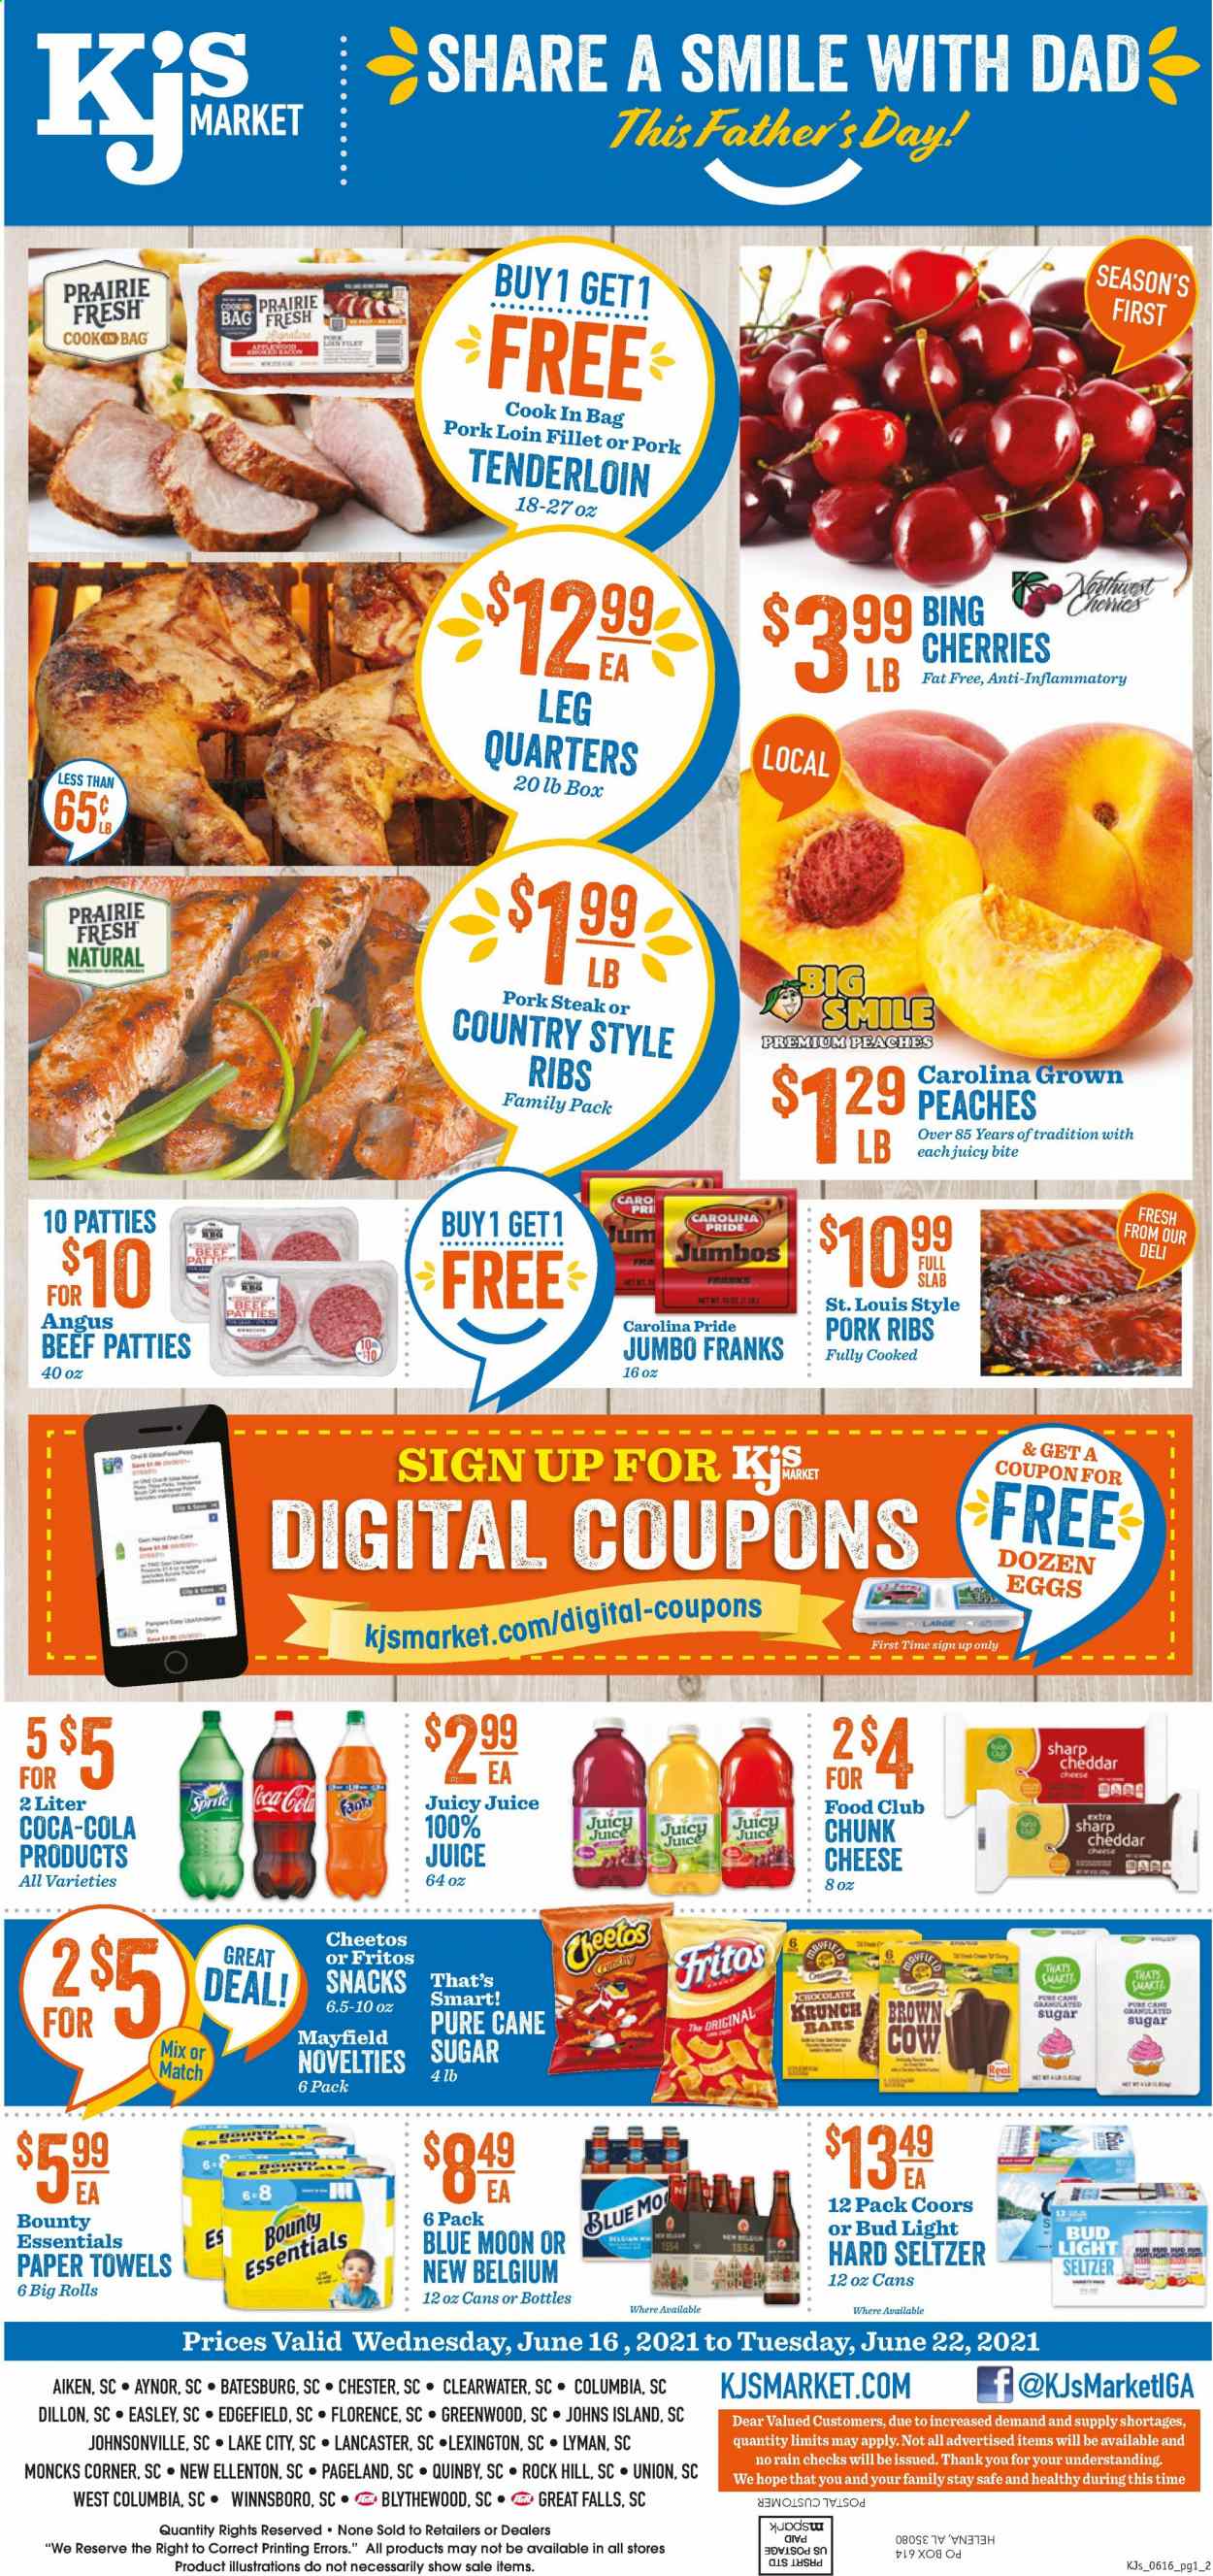 thumbnail - KJ´s Market Flyer - 06/16/2021 - 06/22/2021 - Sales products - Coors, Blue Moon, cherries, Johnsonville, cheddar, cheese, chunk cheese, eggs, chocolate, Bounty, Fritos, Cheetos, cane sugar, sugar, Coca-Cola, juice, Hard Seltzer, beer, Bud Light, beef meat, steak, pork chops, pork loin, pork meat, pork ribs, pork tenderloin, country style ribs, kitchen towels, paper towels, peaches. Page 1.